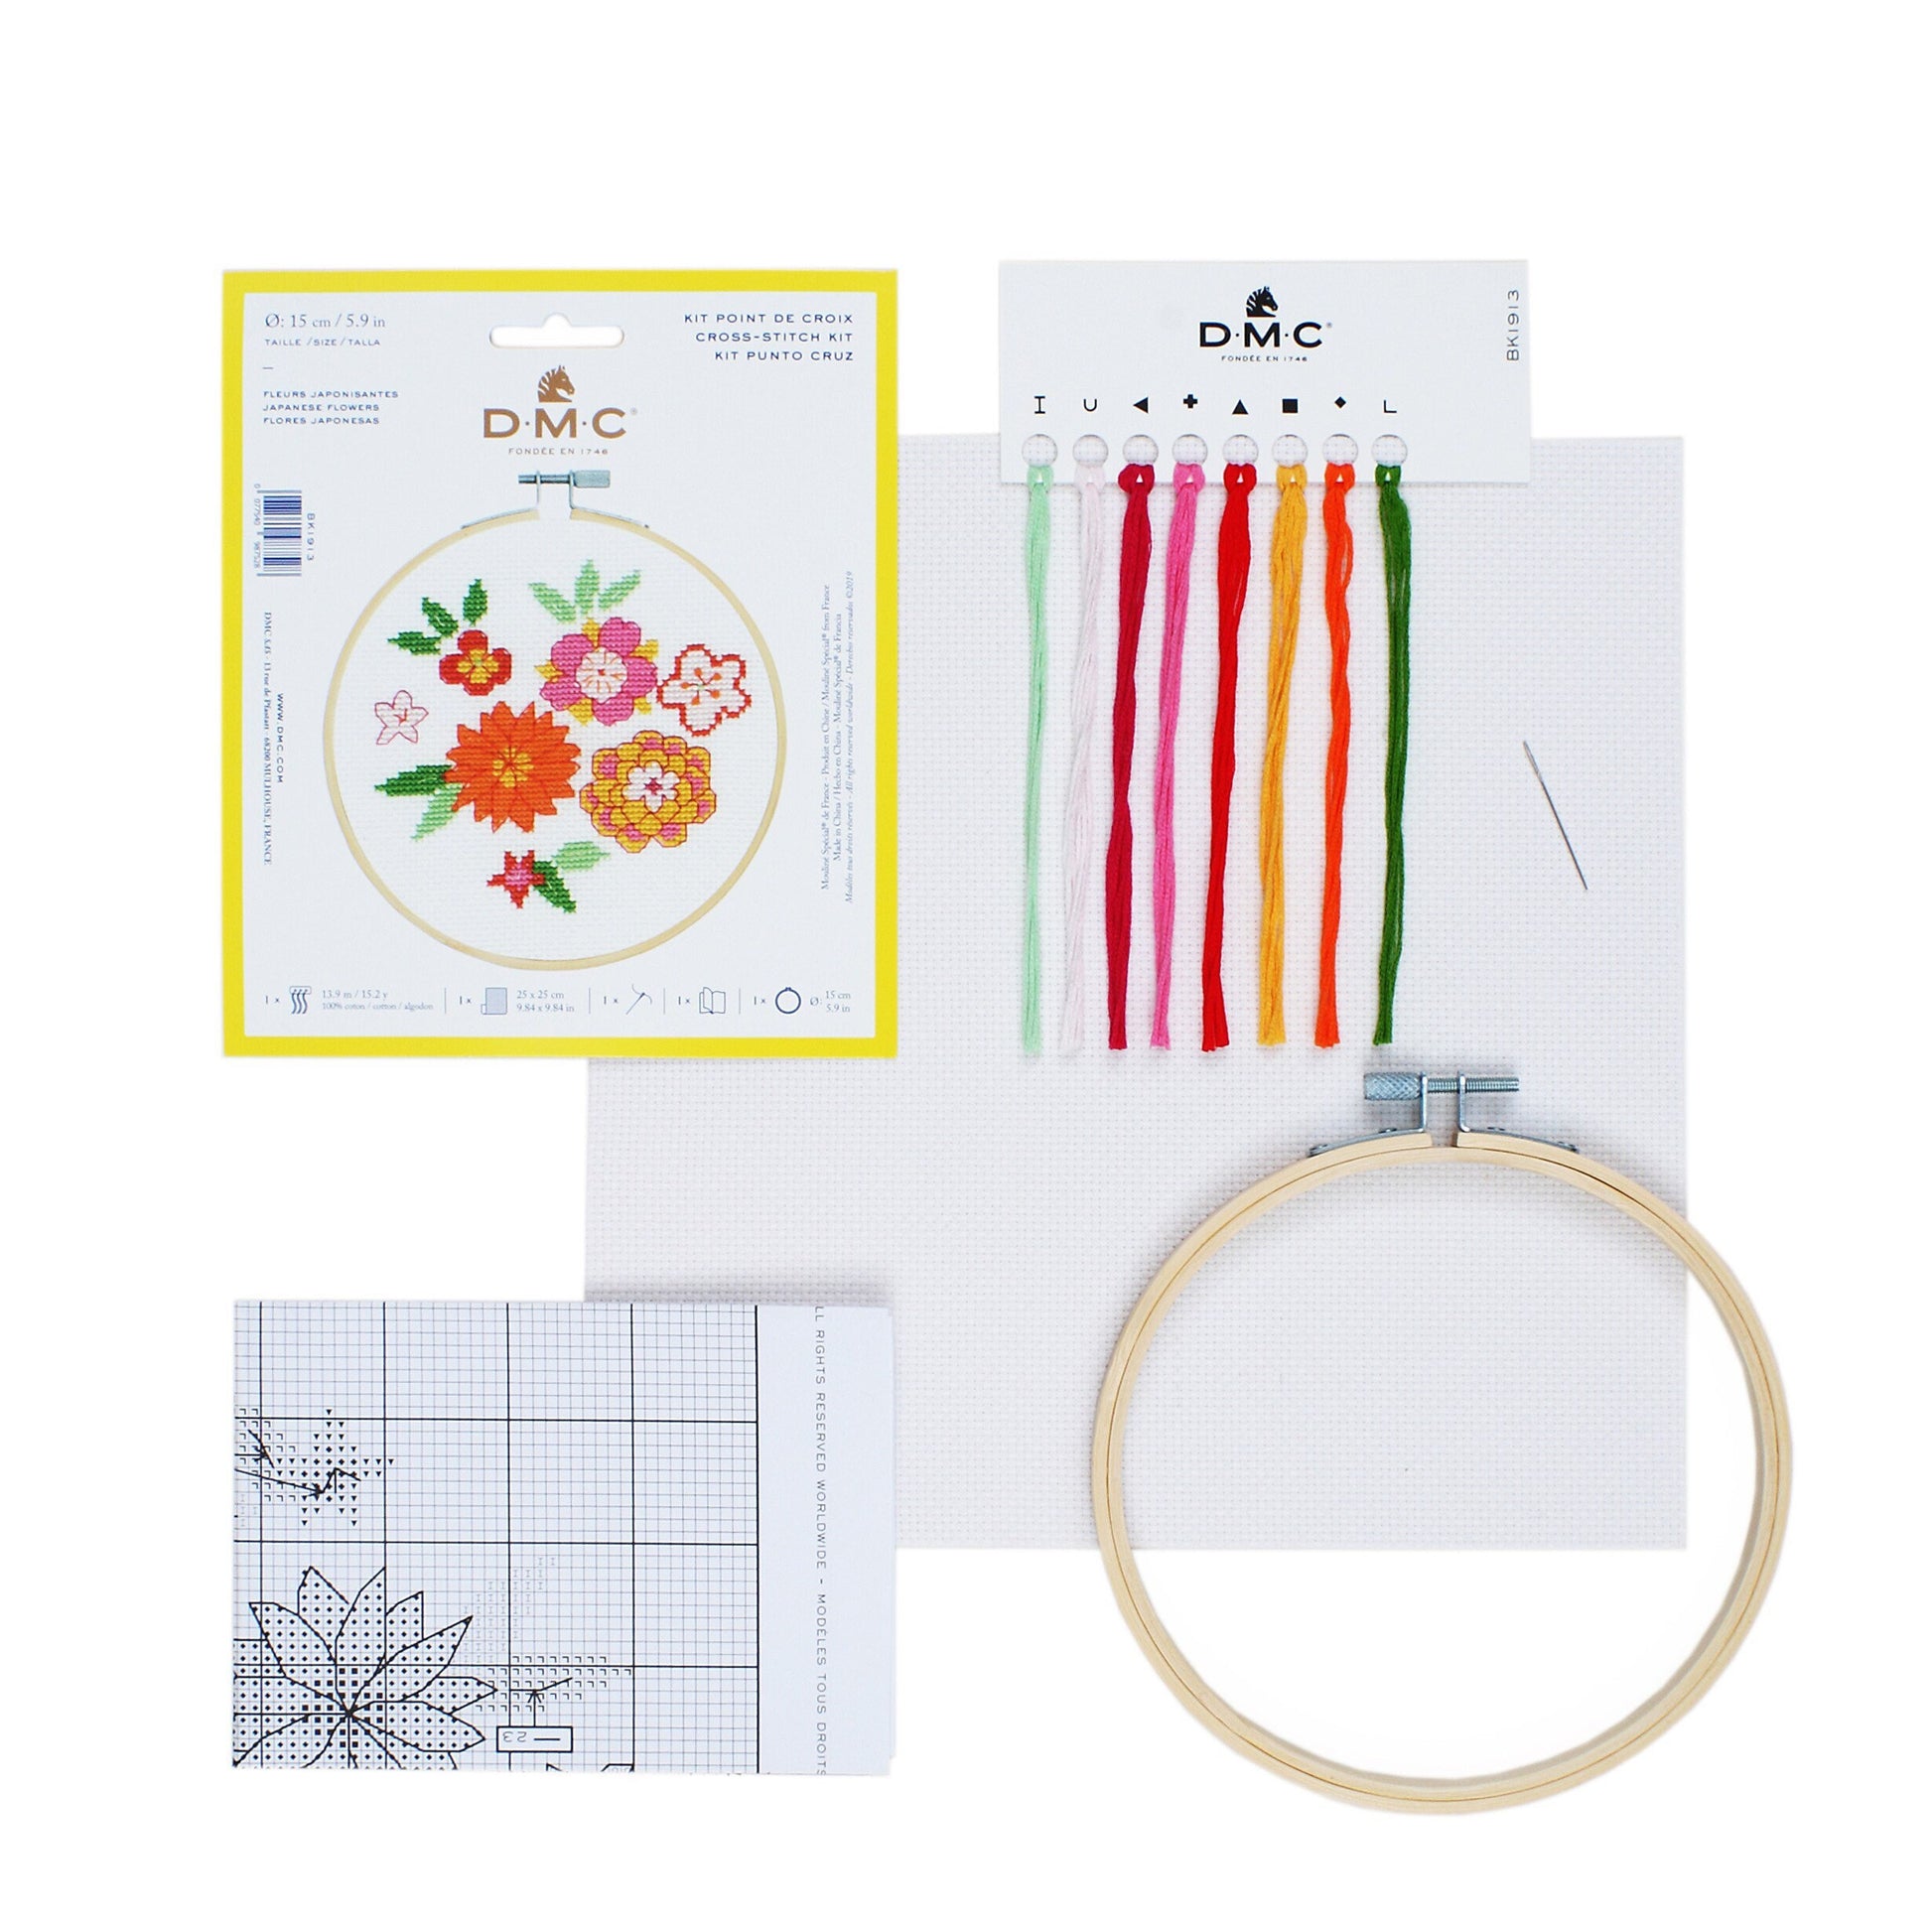 Floral Cross Stitch Kit - Pattern, Floss, Fabric, Hoop and Needle included